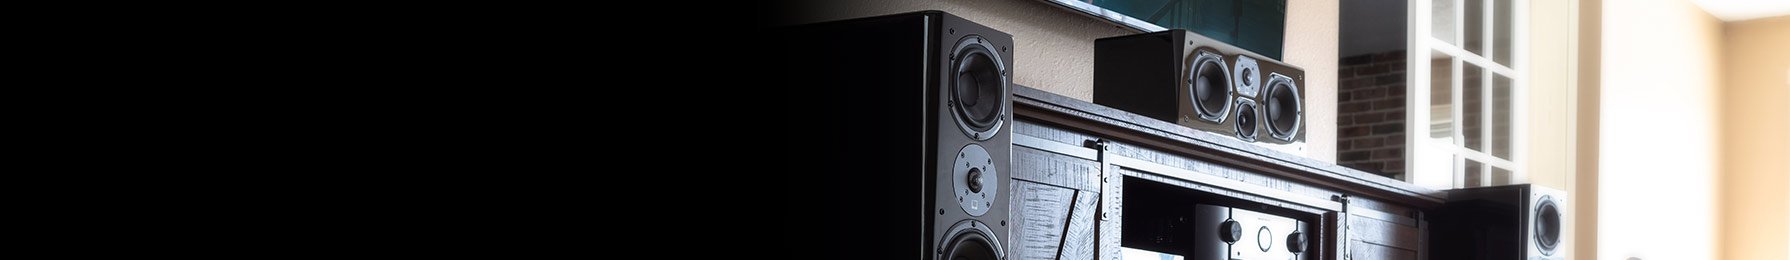 Why a Center Channel is the Most Important Speaker in Your Home Theater